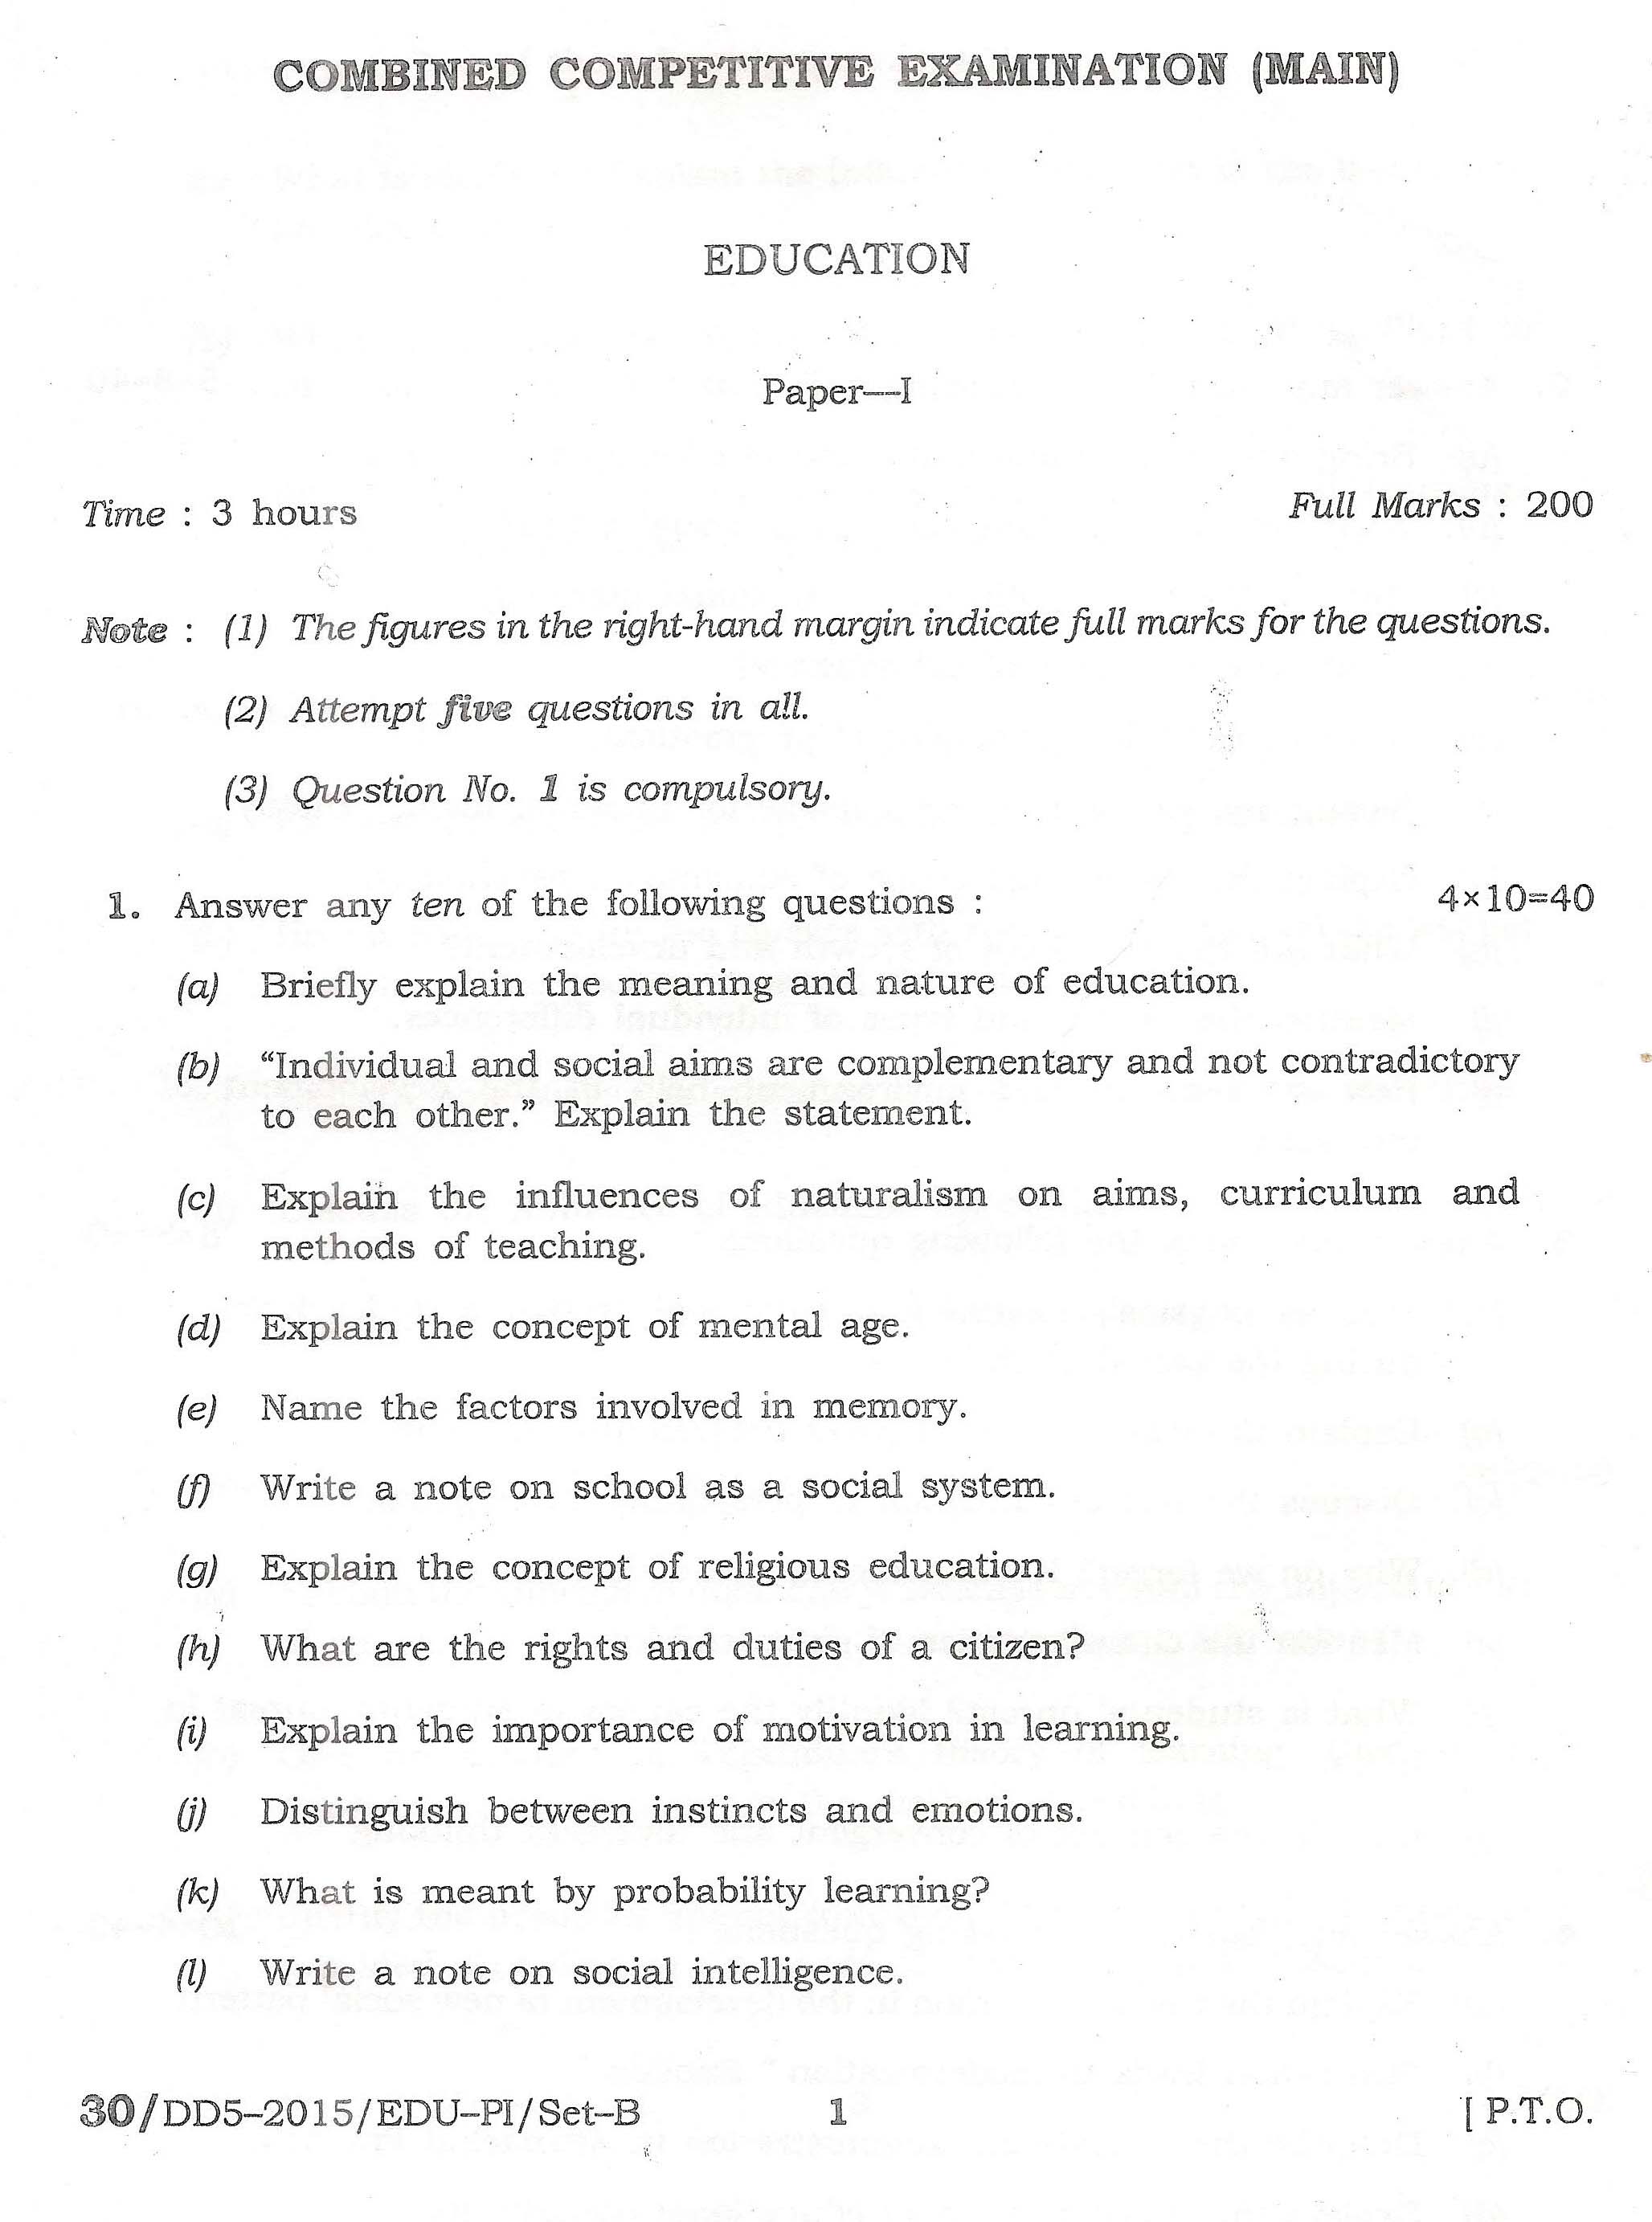 APPSC Combined Competitive Main Exam 2015 Education Paper I 1